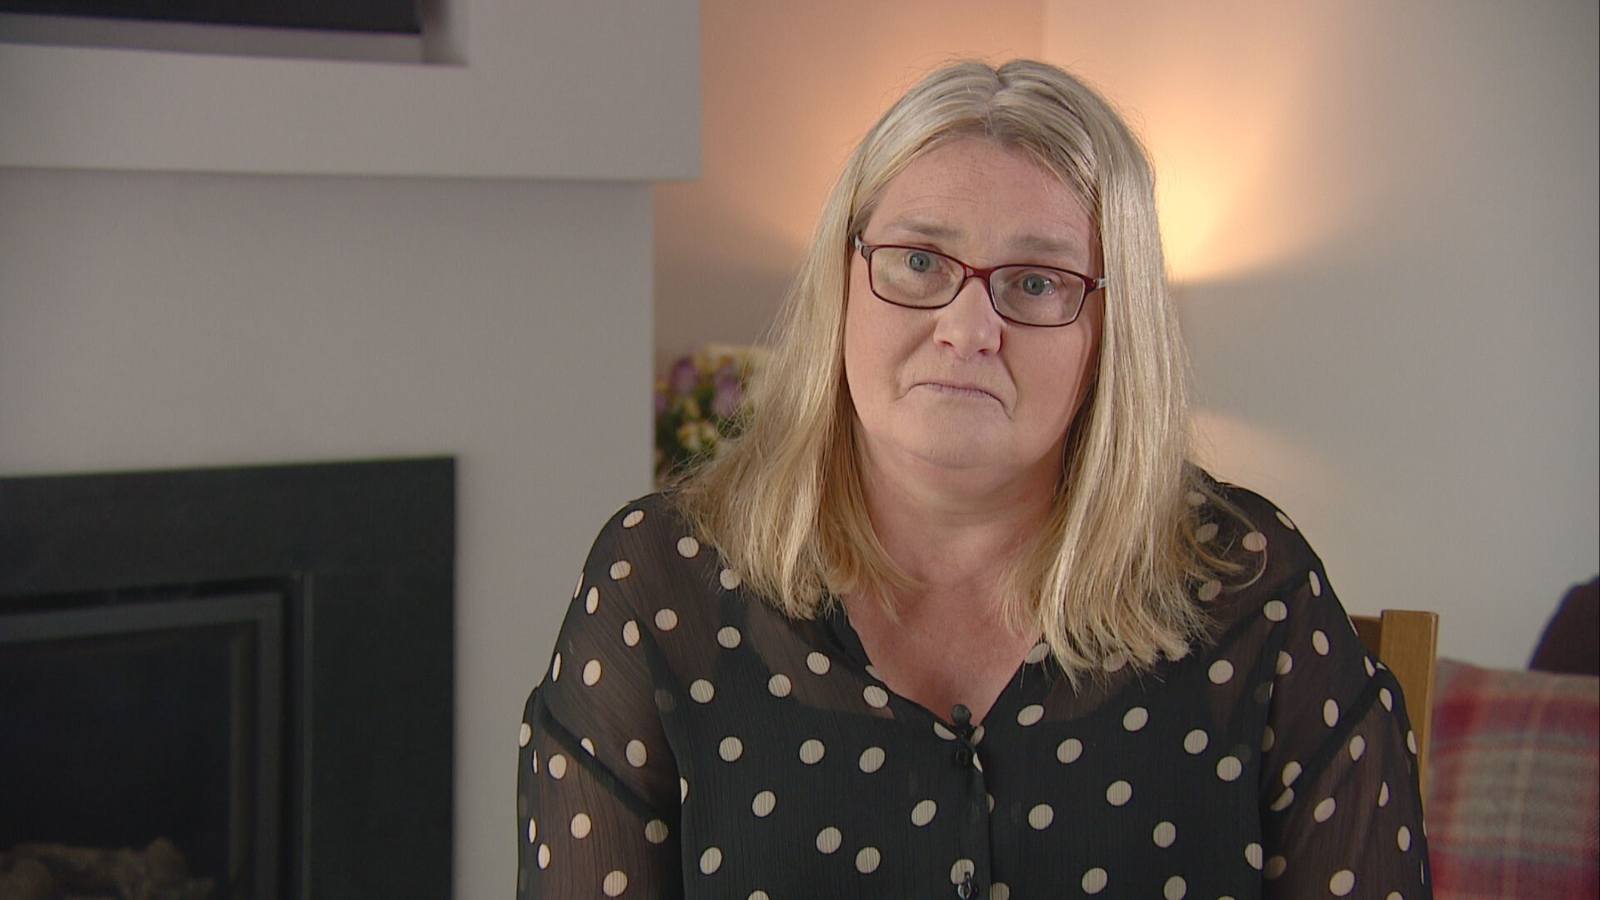 Jennifer spoke with STV News about her cryptocurrency scam experience.